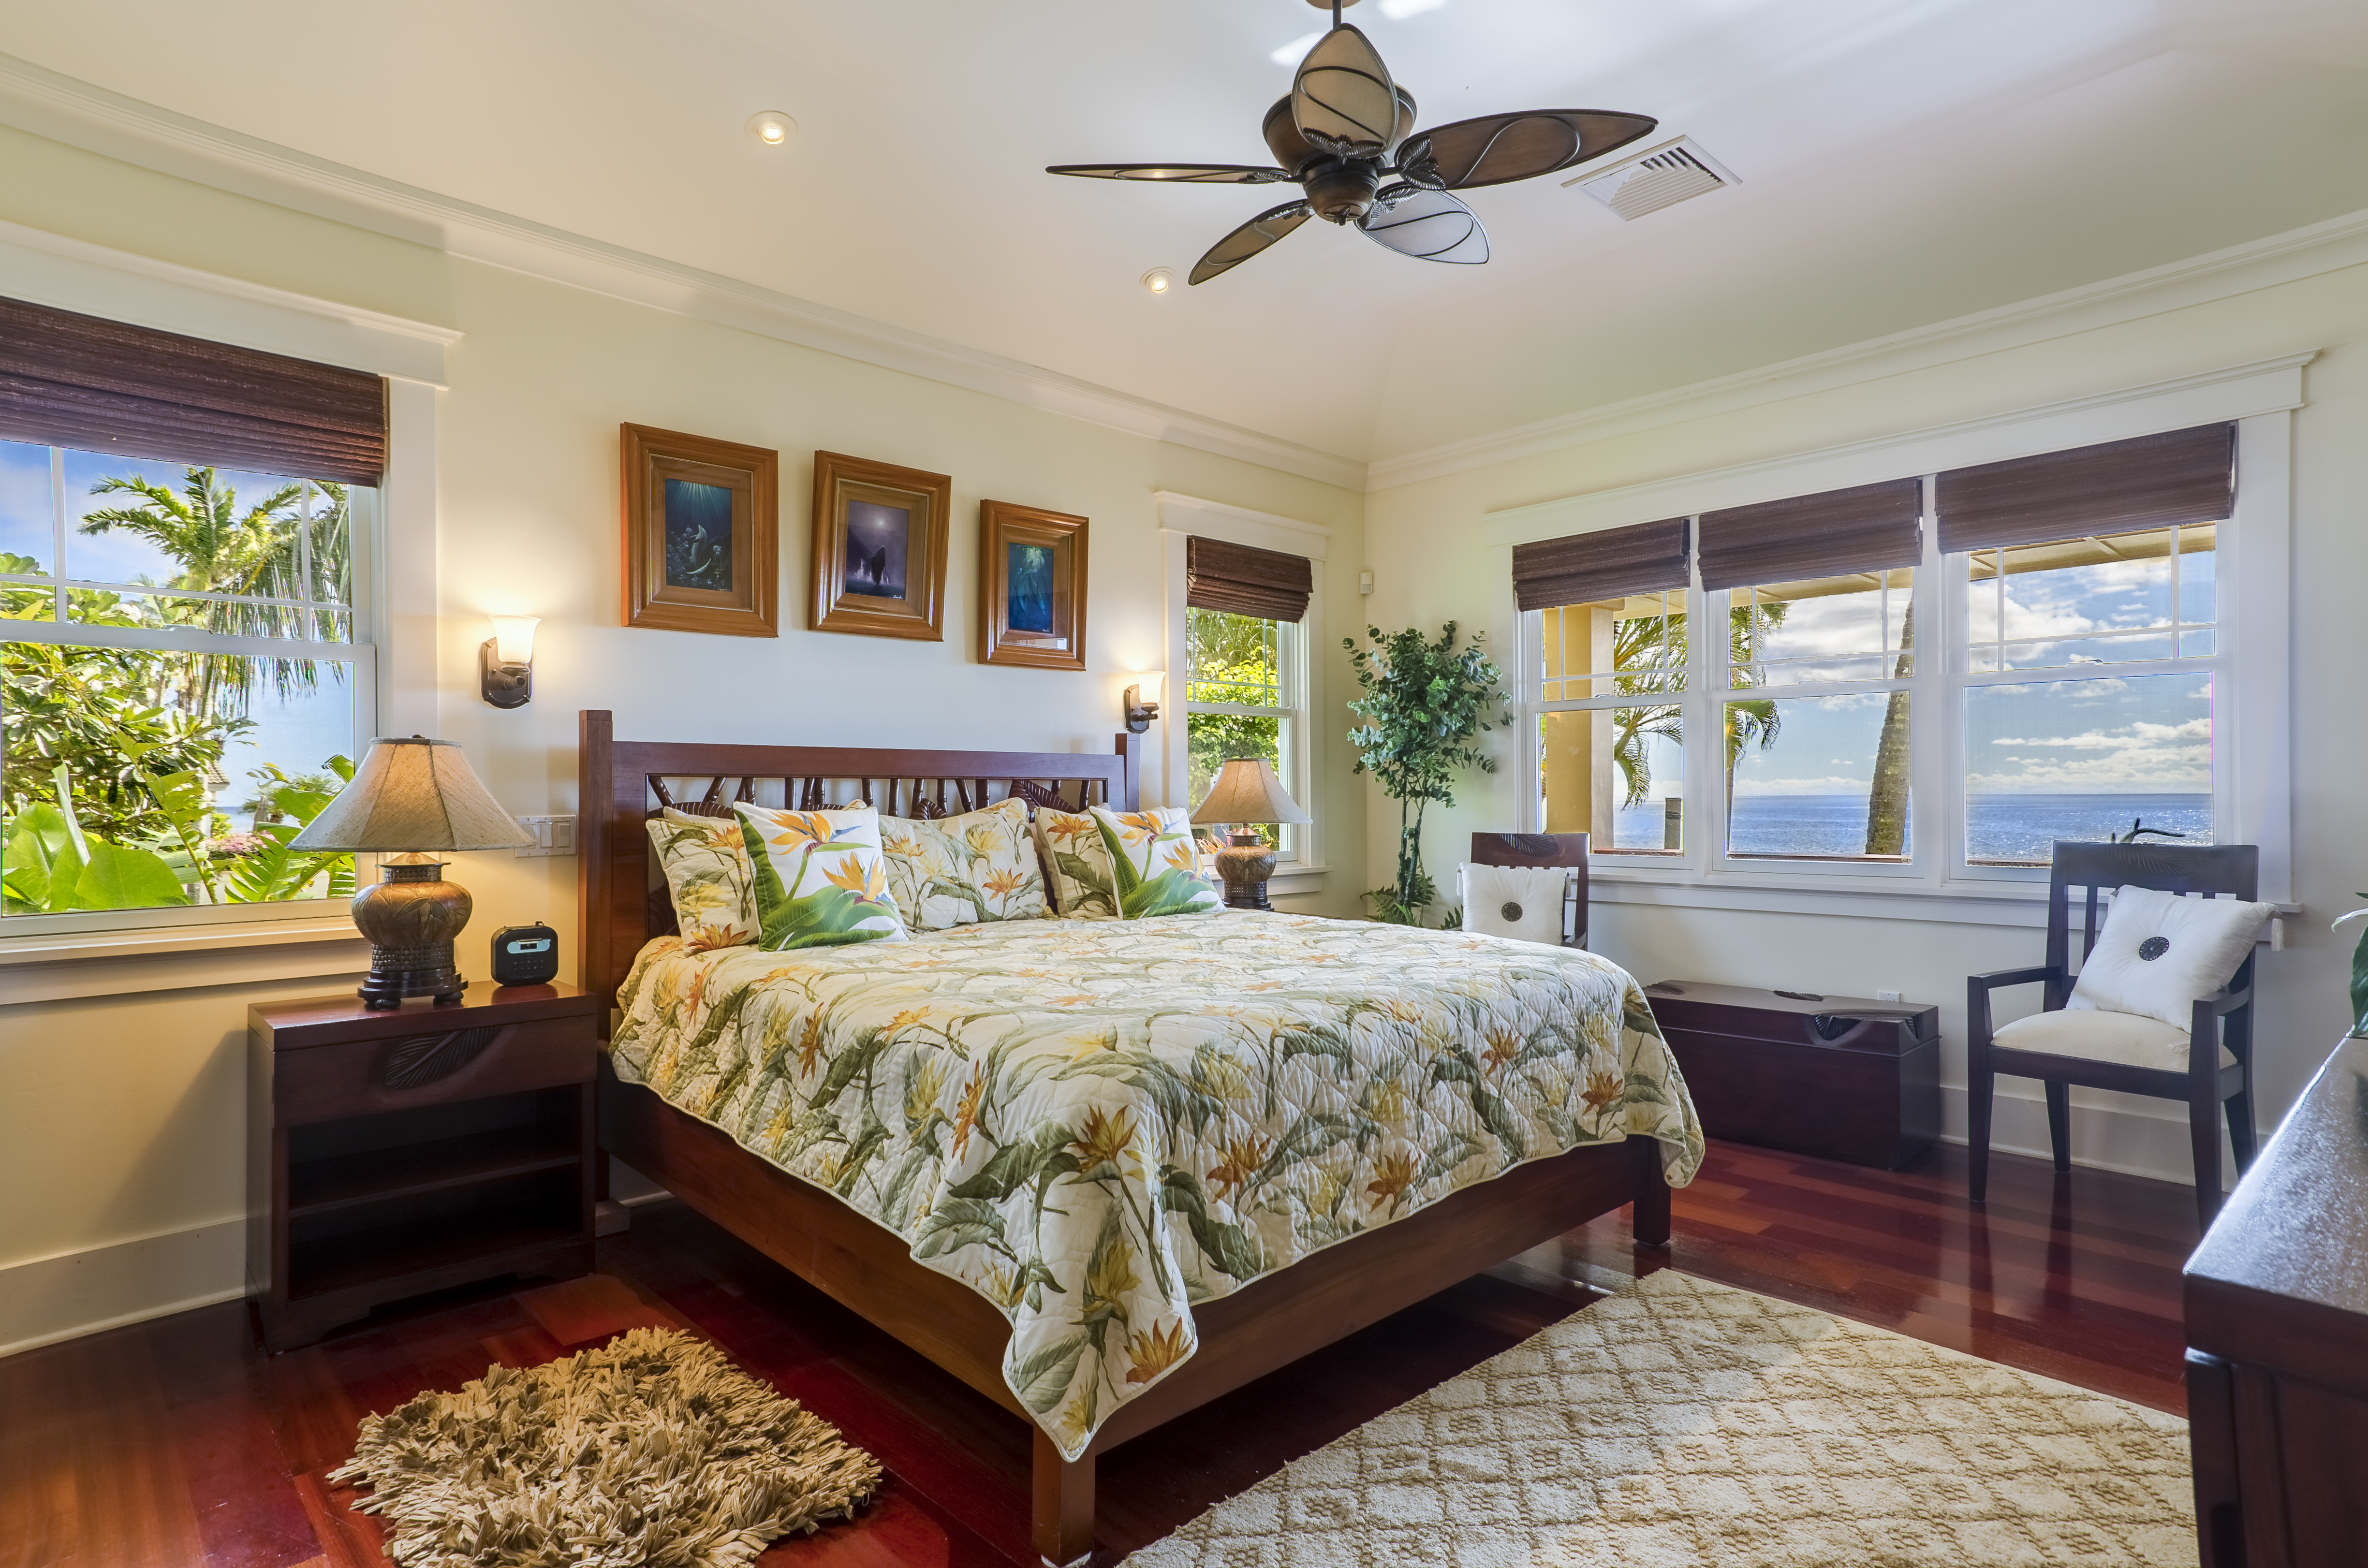 The master bedroom has a comfortable king bed, luxury furnishings and linens, and views of the Pacific waves.